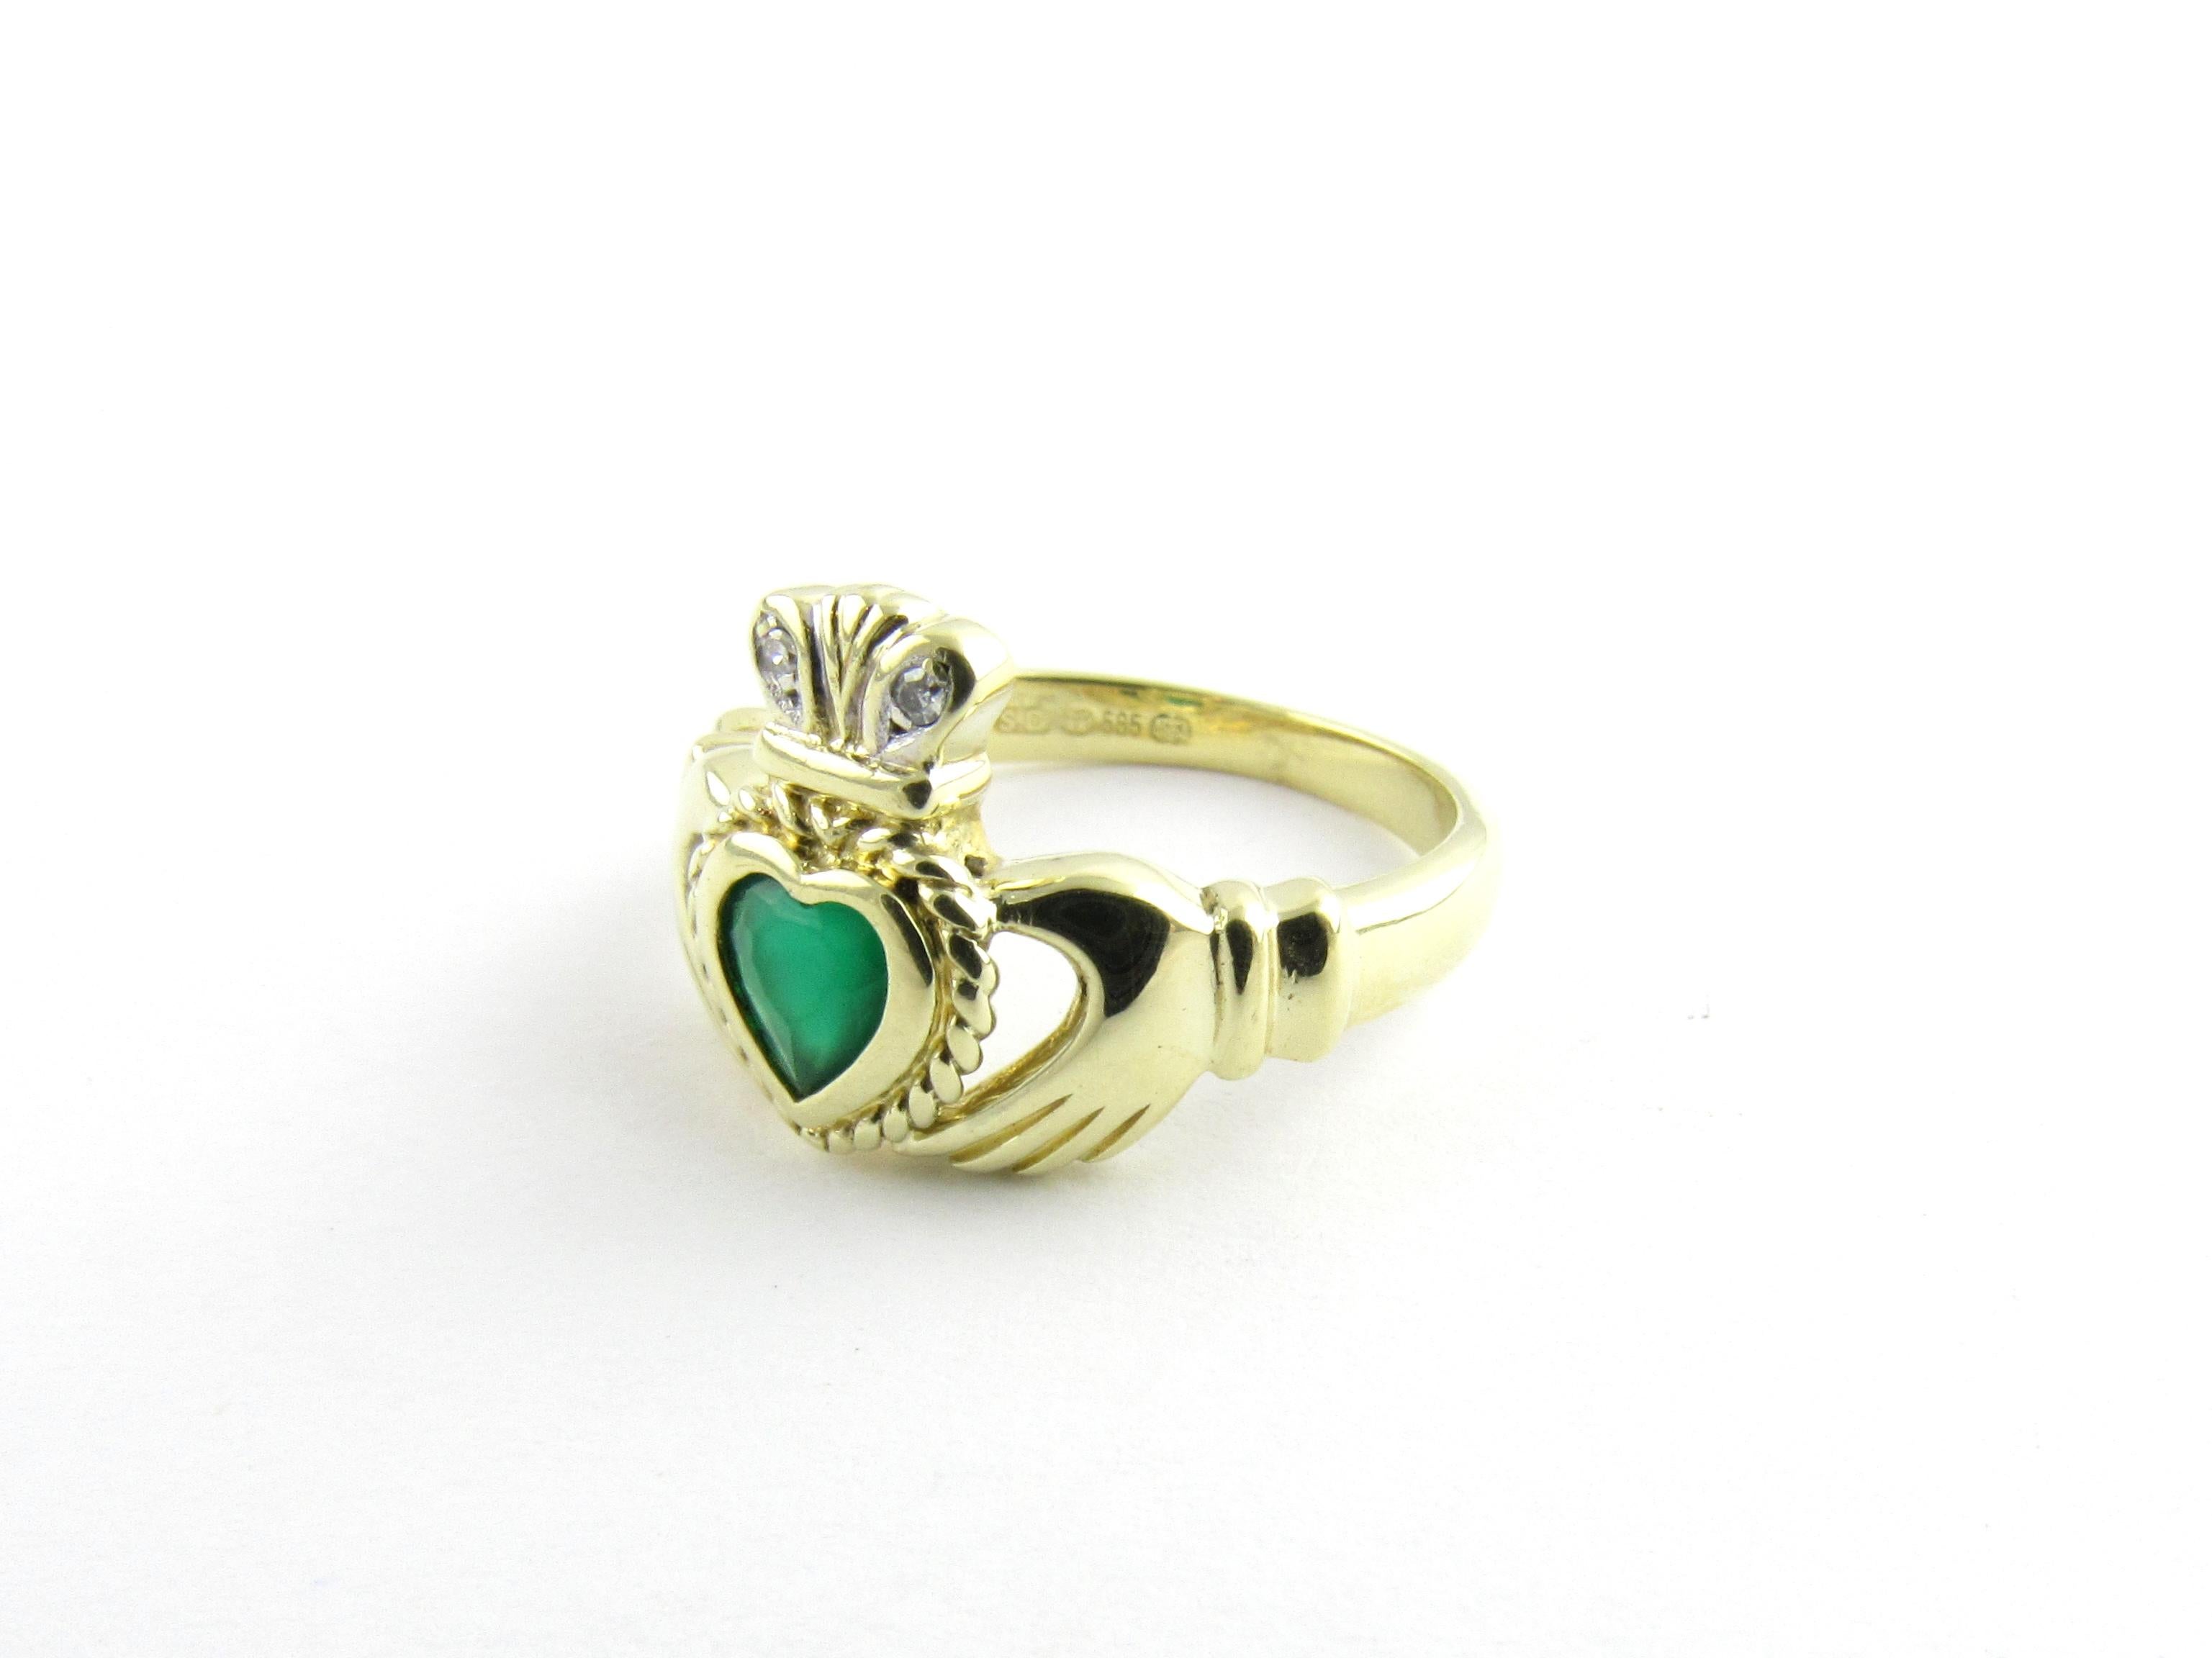 Vintage 14 Karat Yellow Gold Emerald and Diamond Claddagh Ring Size 6

The traditional Irish Claddagh Ring is a symbol of friendship, loyalty and love.

Decorated with one heart shaped emerald and two round single cut diamonds and crafted in